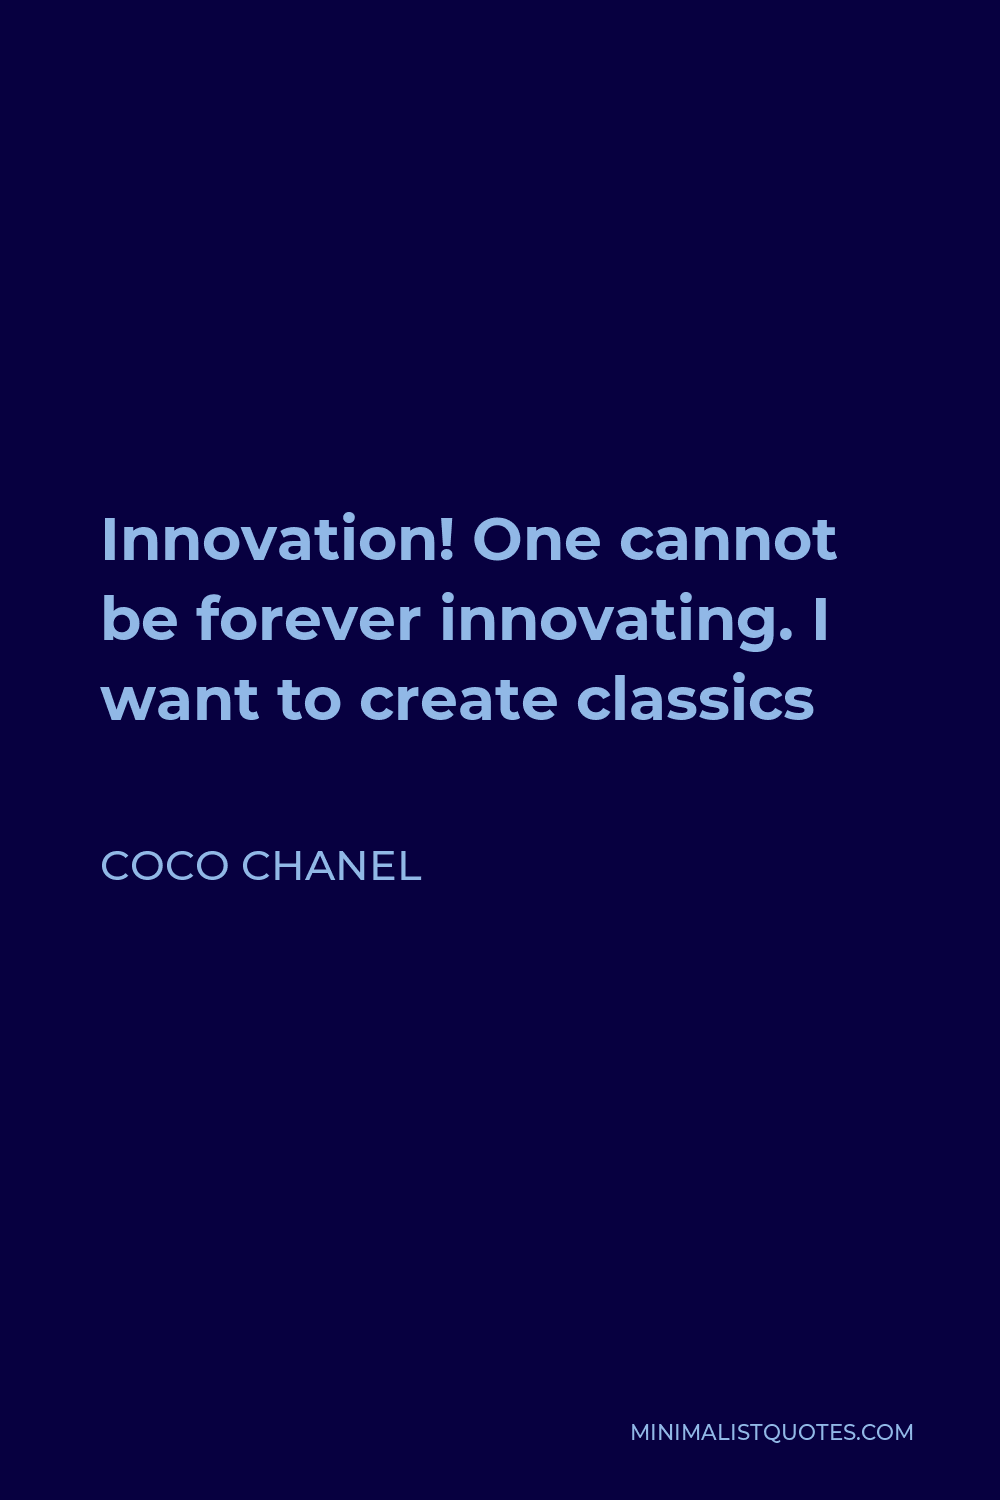 Coco Chanel Quote - Innovation! One cannot be forever innovating. I want to create classics